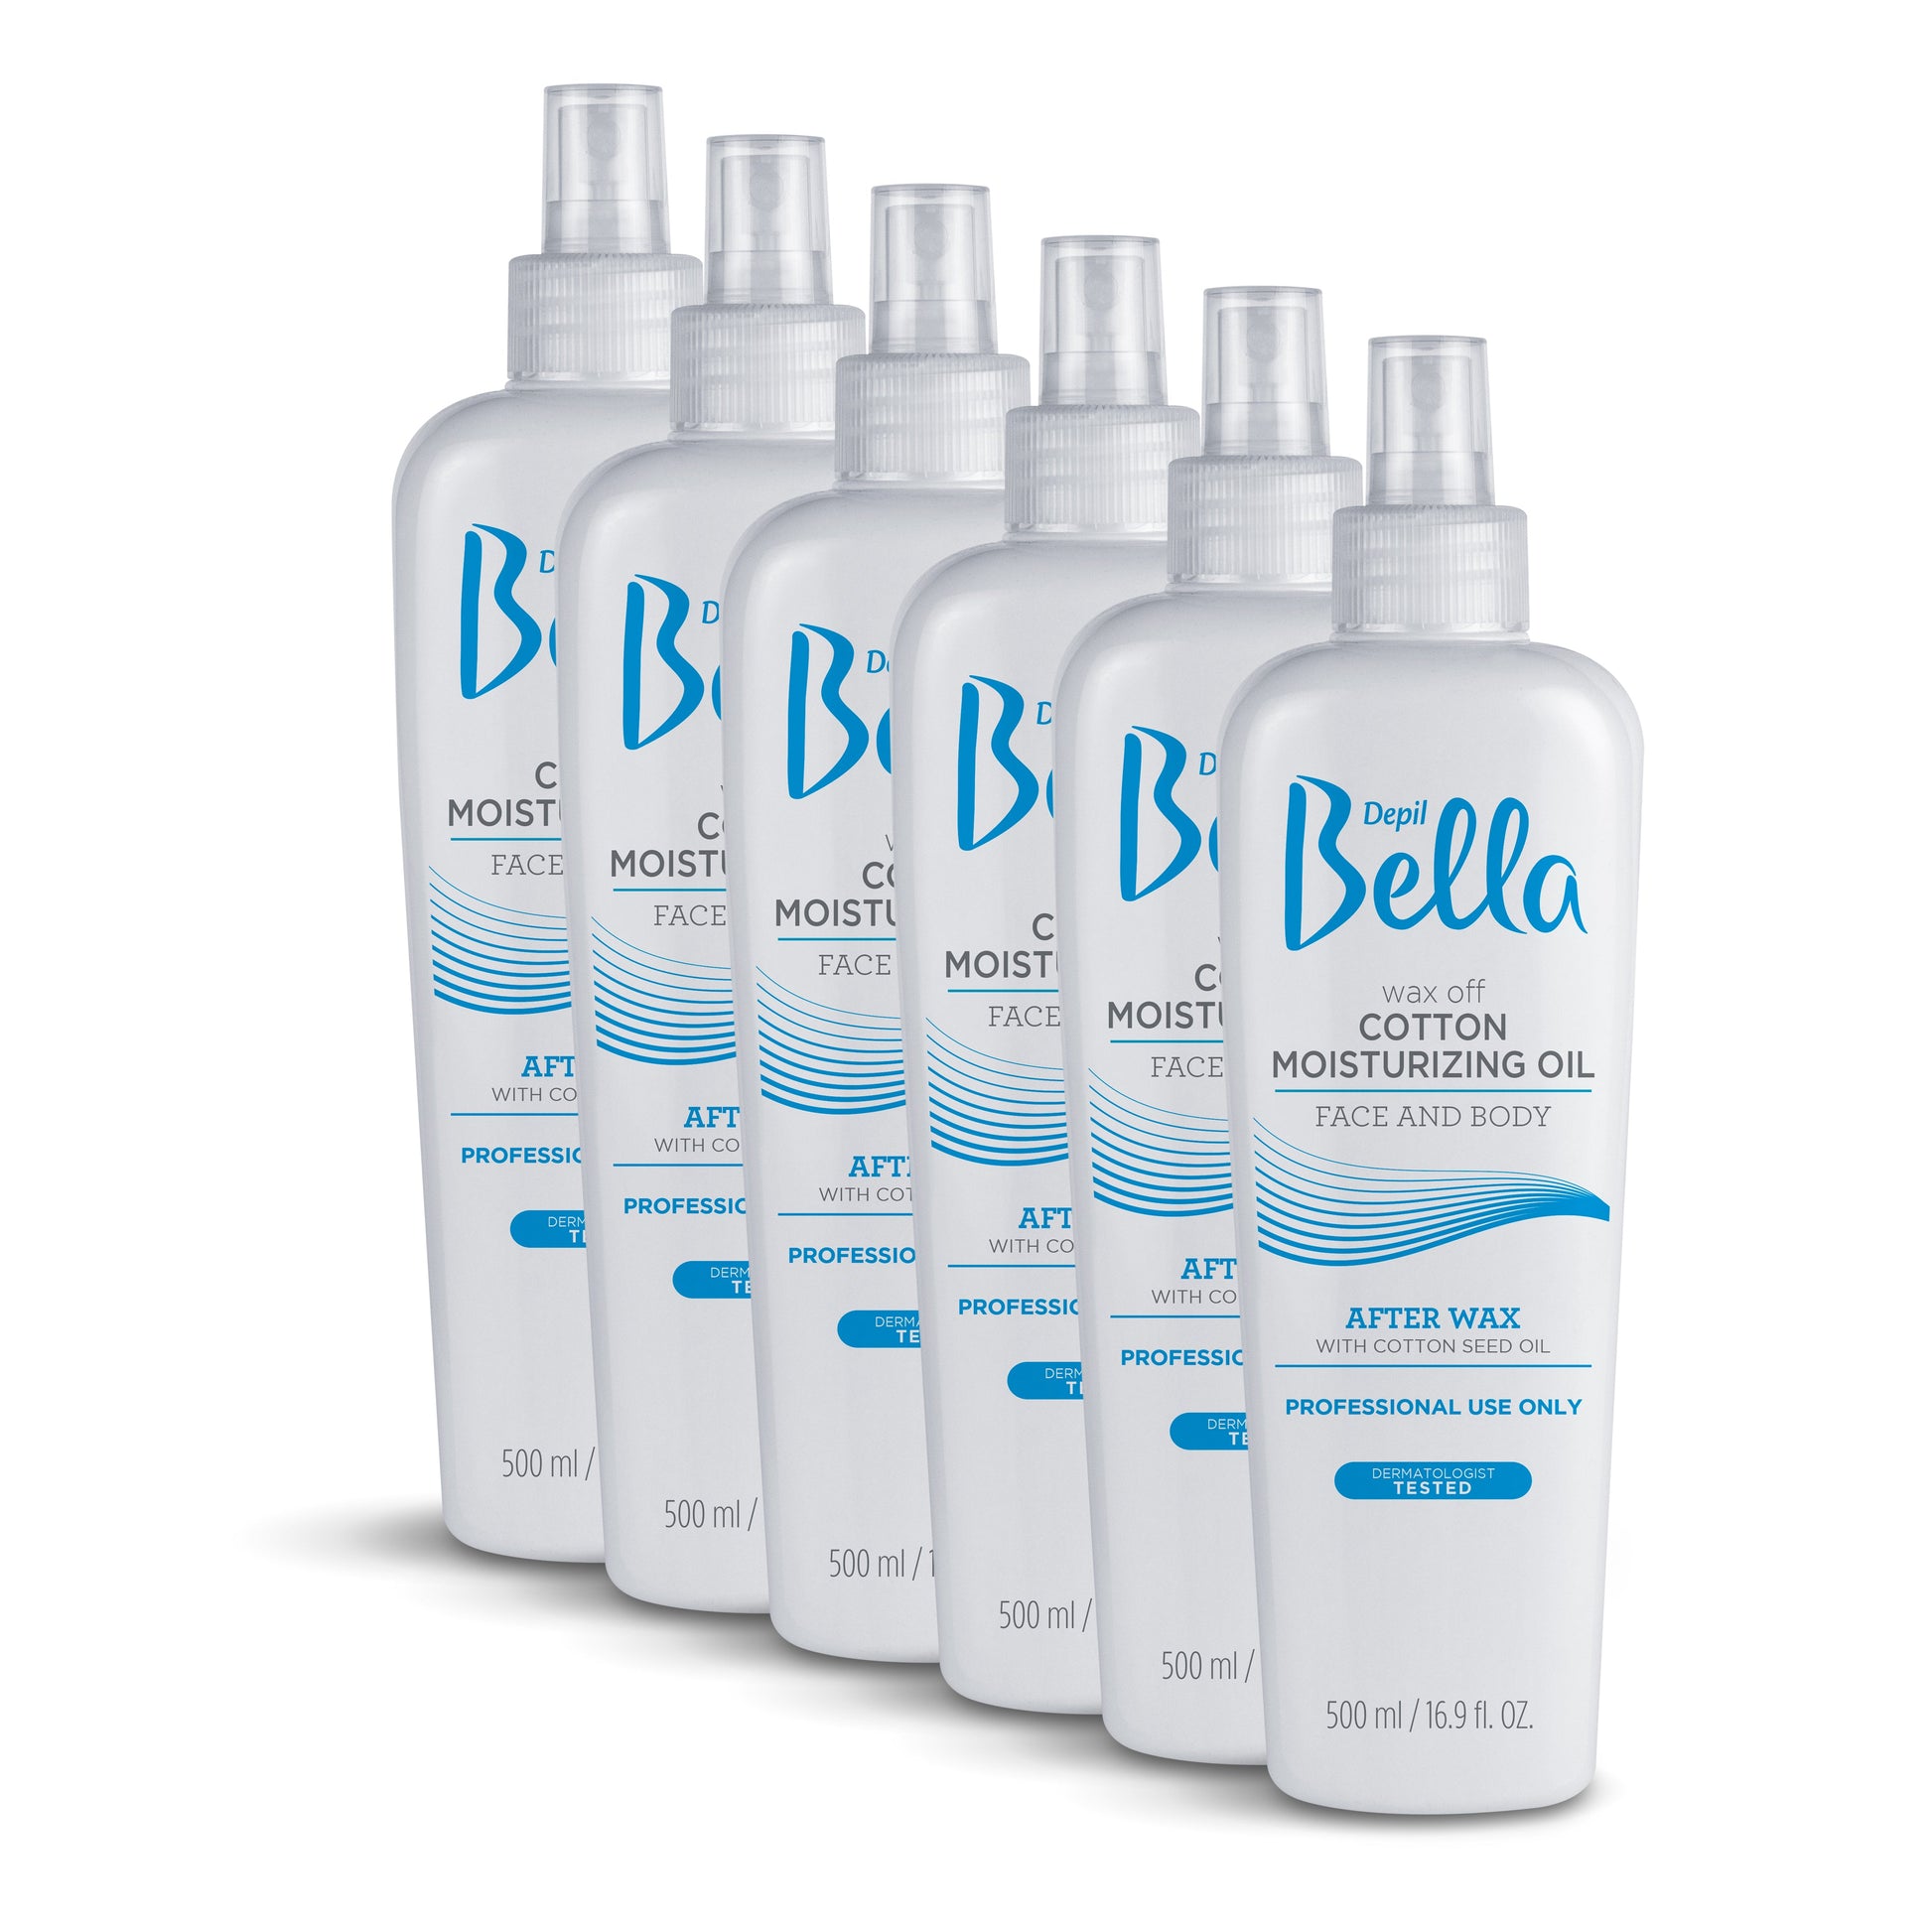 Depil Bella Post Waxing - Oil Moisturizing Remover with Cotton Seed Oil 500 ml (6 Units offer) - Depilcompany